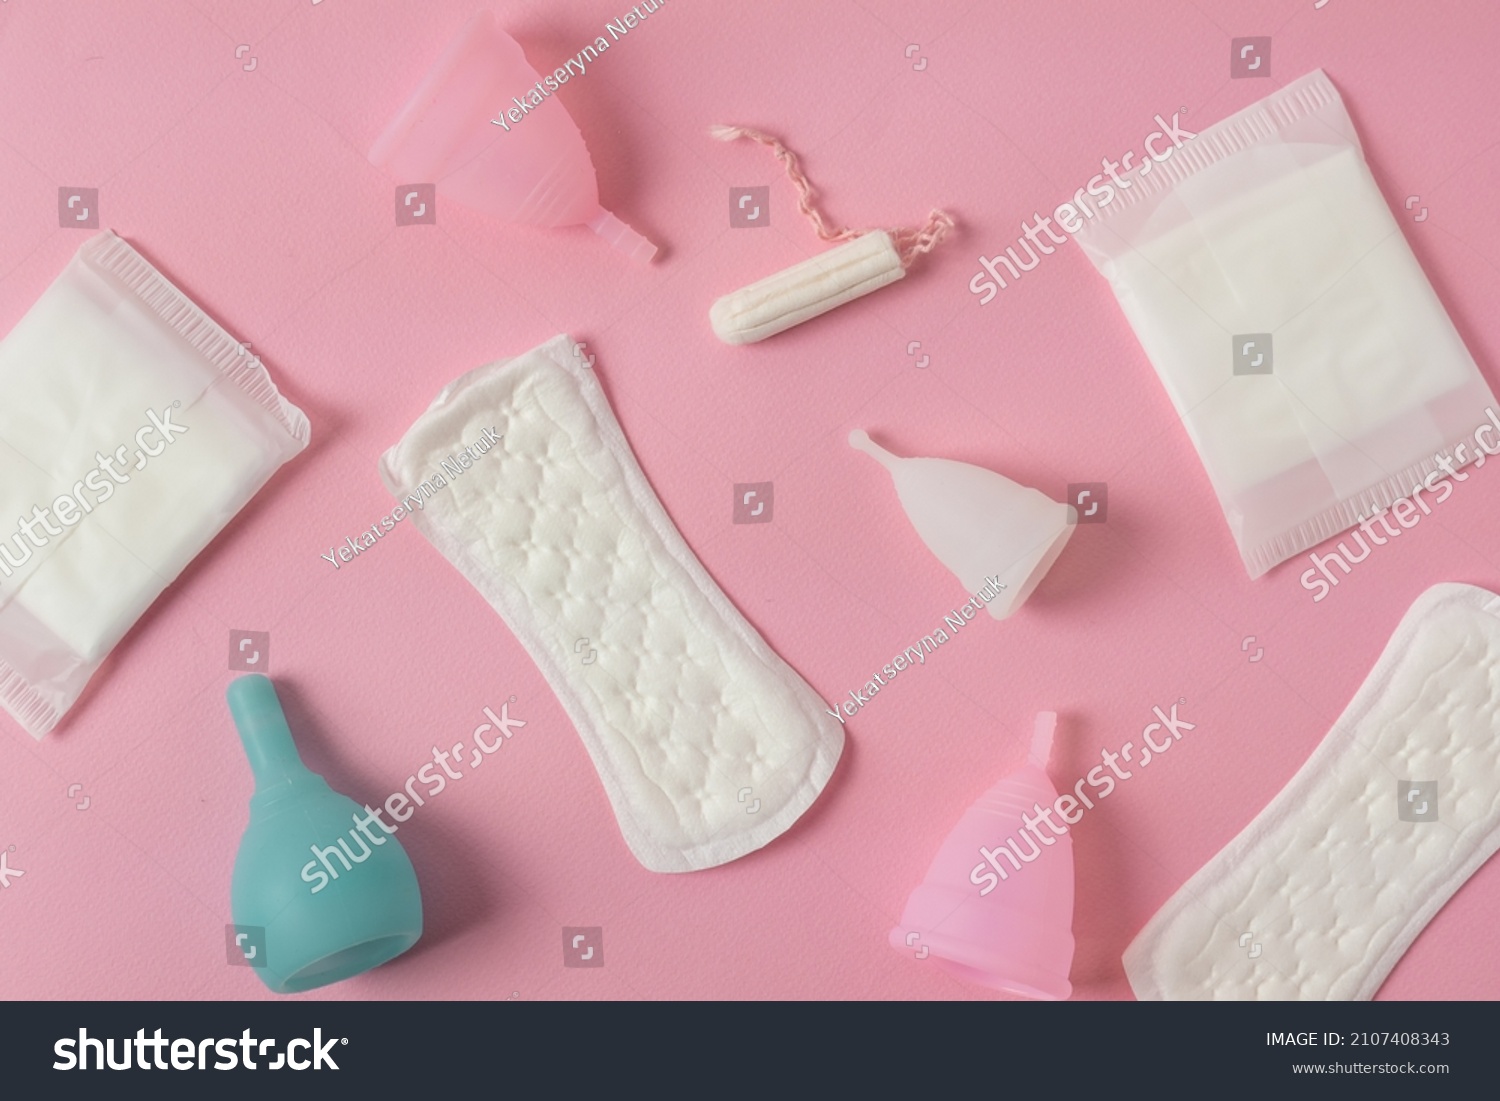 Different types of feminine menstrual hygiene materials products such as pads cloths tampons and cups. Pink background. Menstruation and feminine hygiene concept. #2107408343